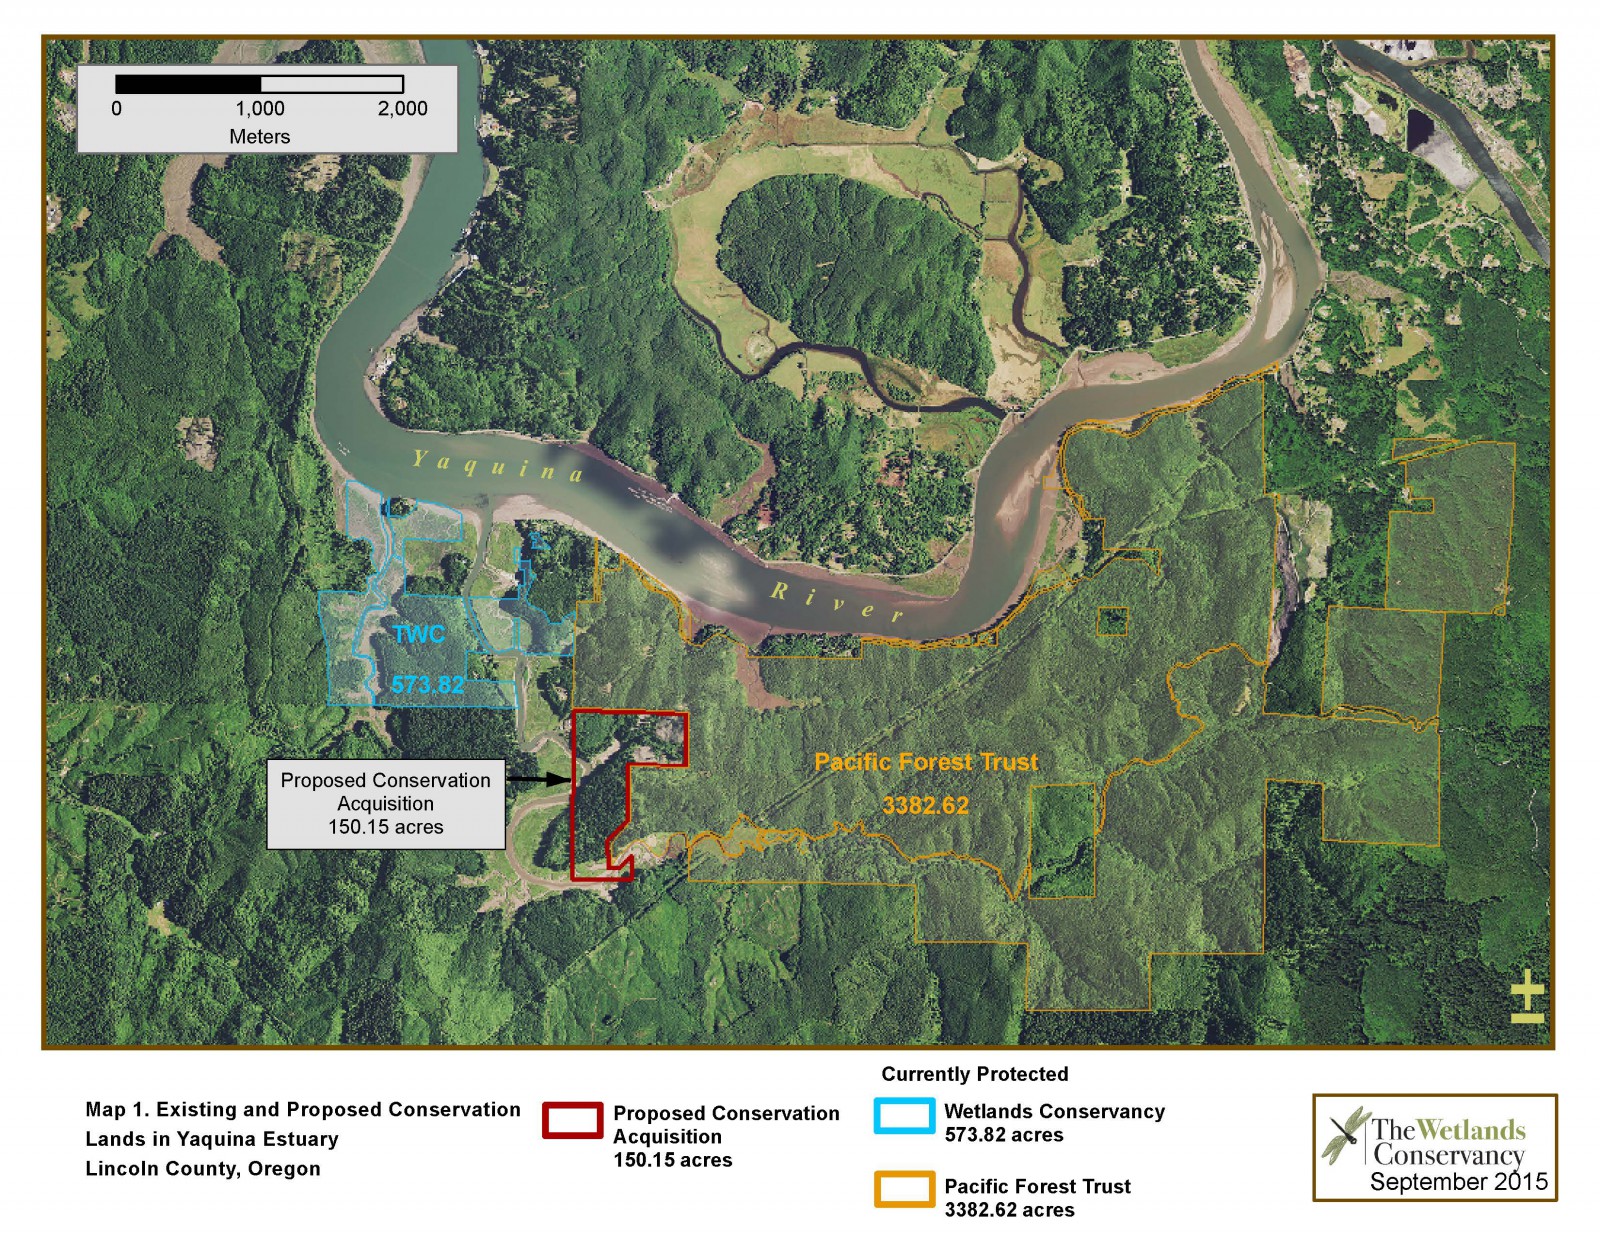 Poole Slough Acquisition, Assessment, and Planning, Yaquina estuary, OR  (2016)